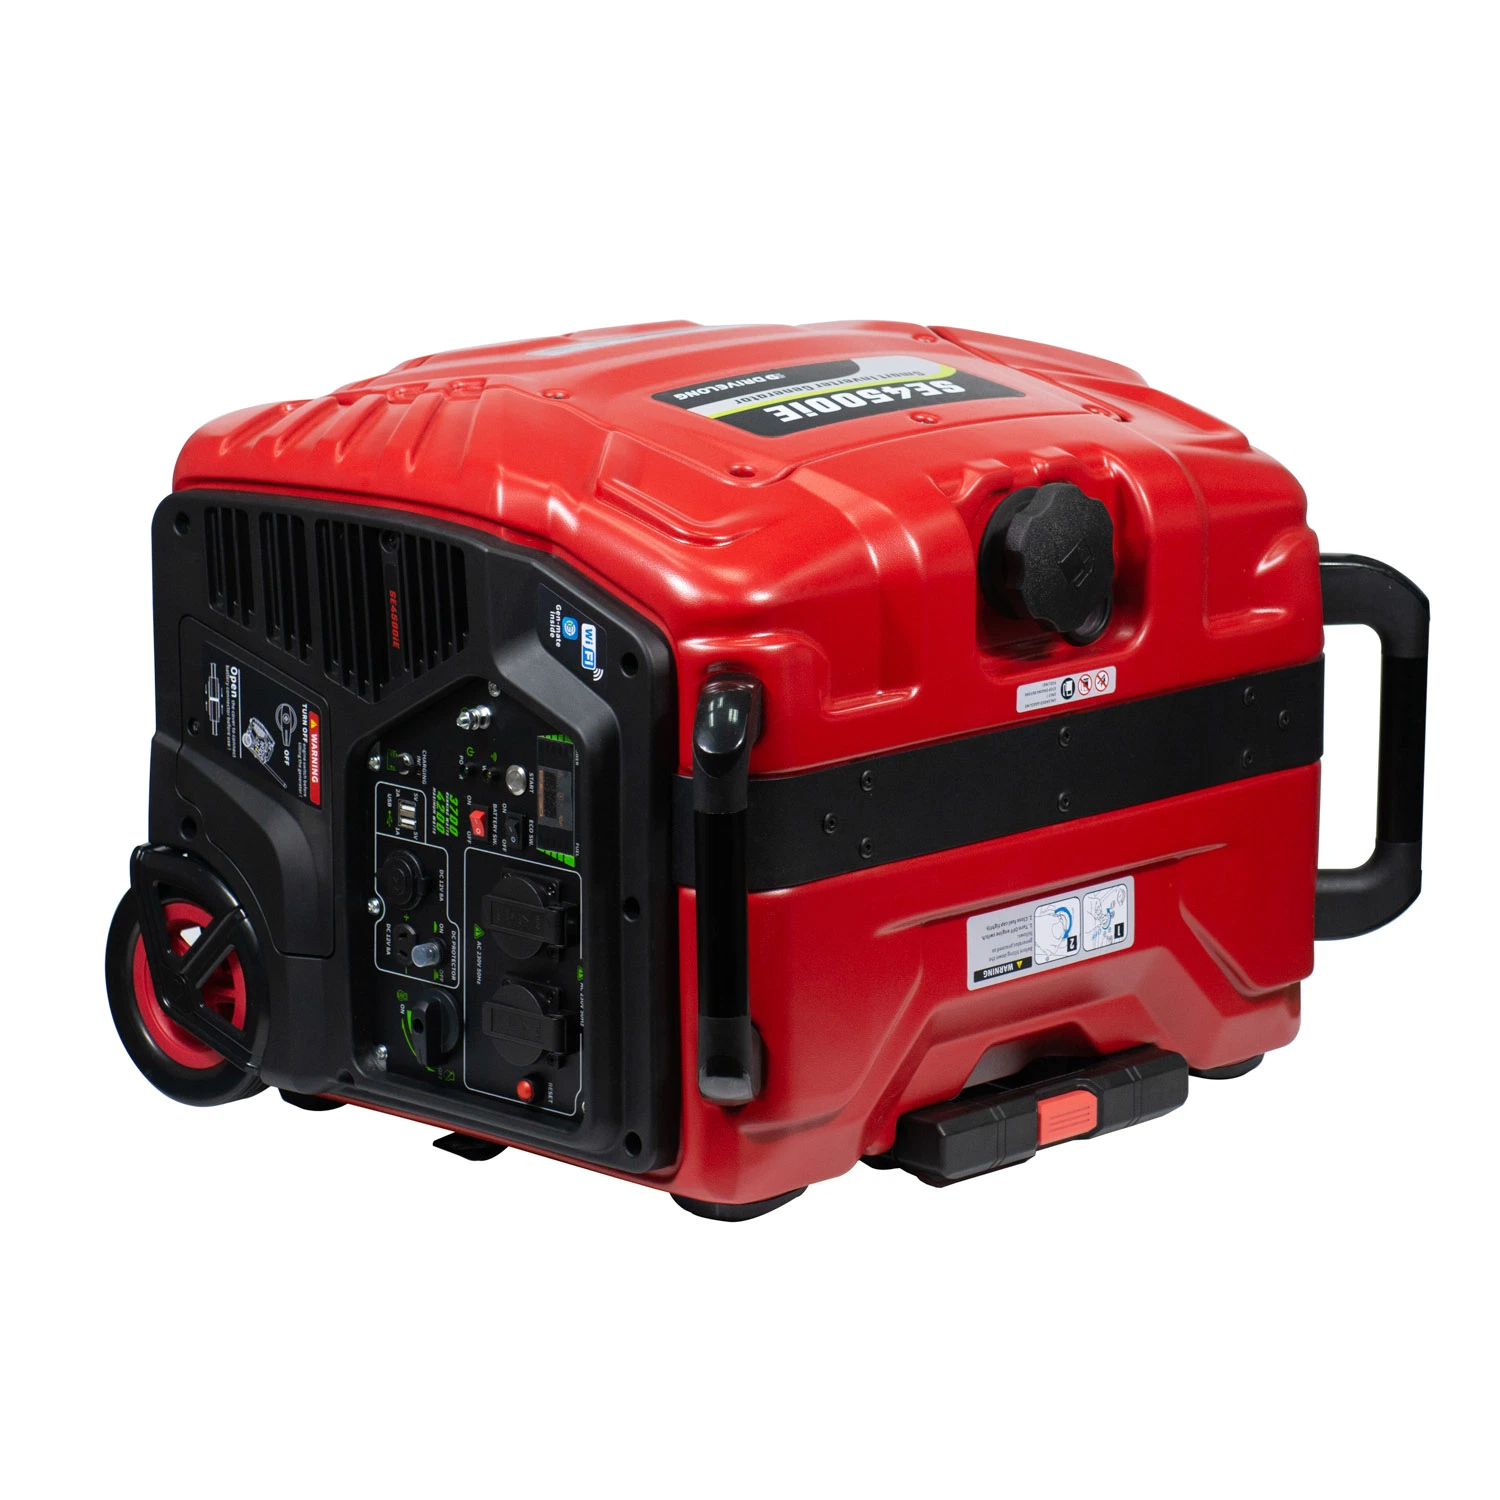 220V 60Hz 4500va with Short Circuit Overload Over Temperature and Other Protection Functions Inverter Generator